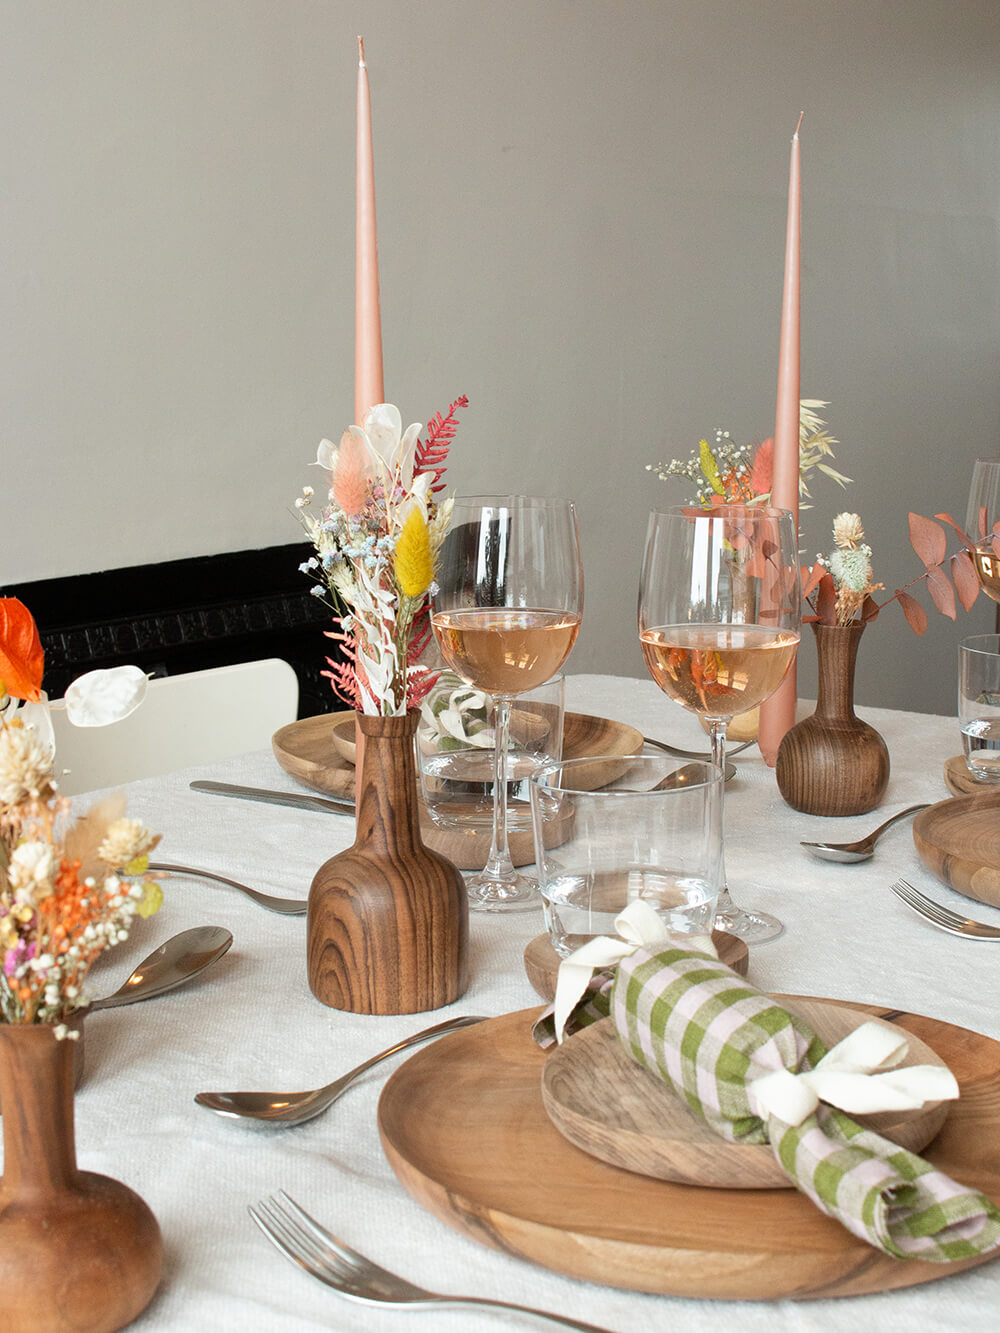 A table set for christmas dinner with wooden tableware, pink candles and rose wine